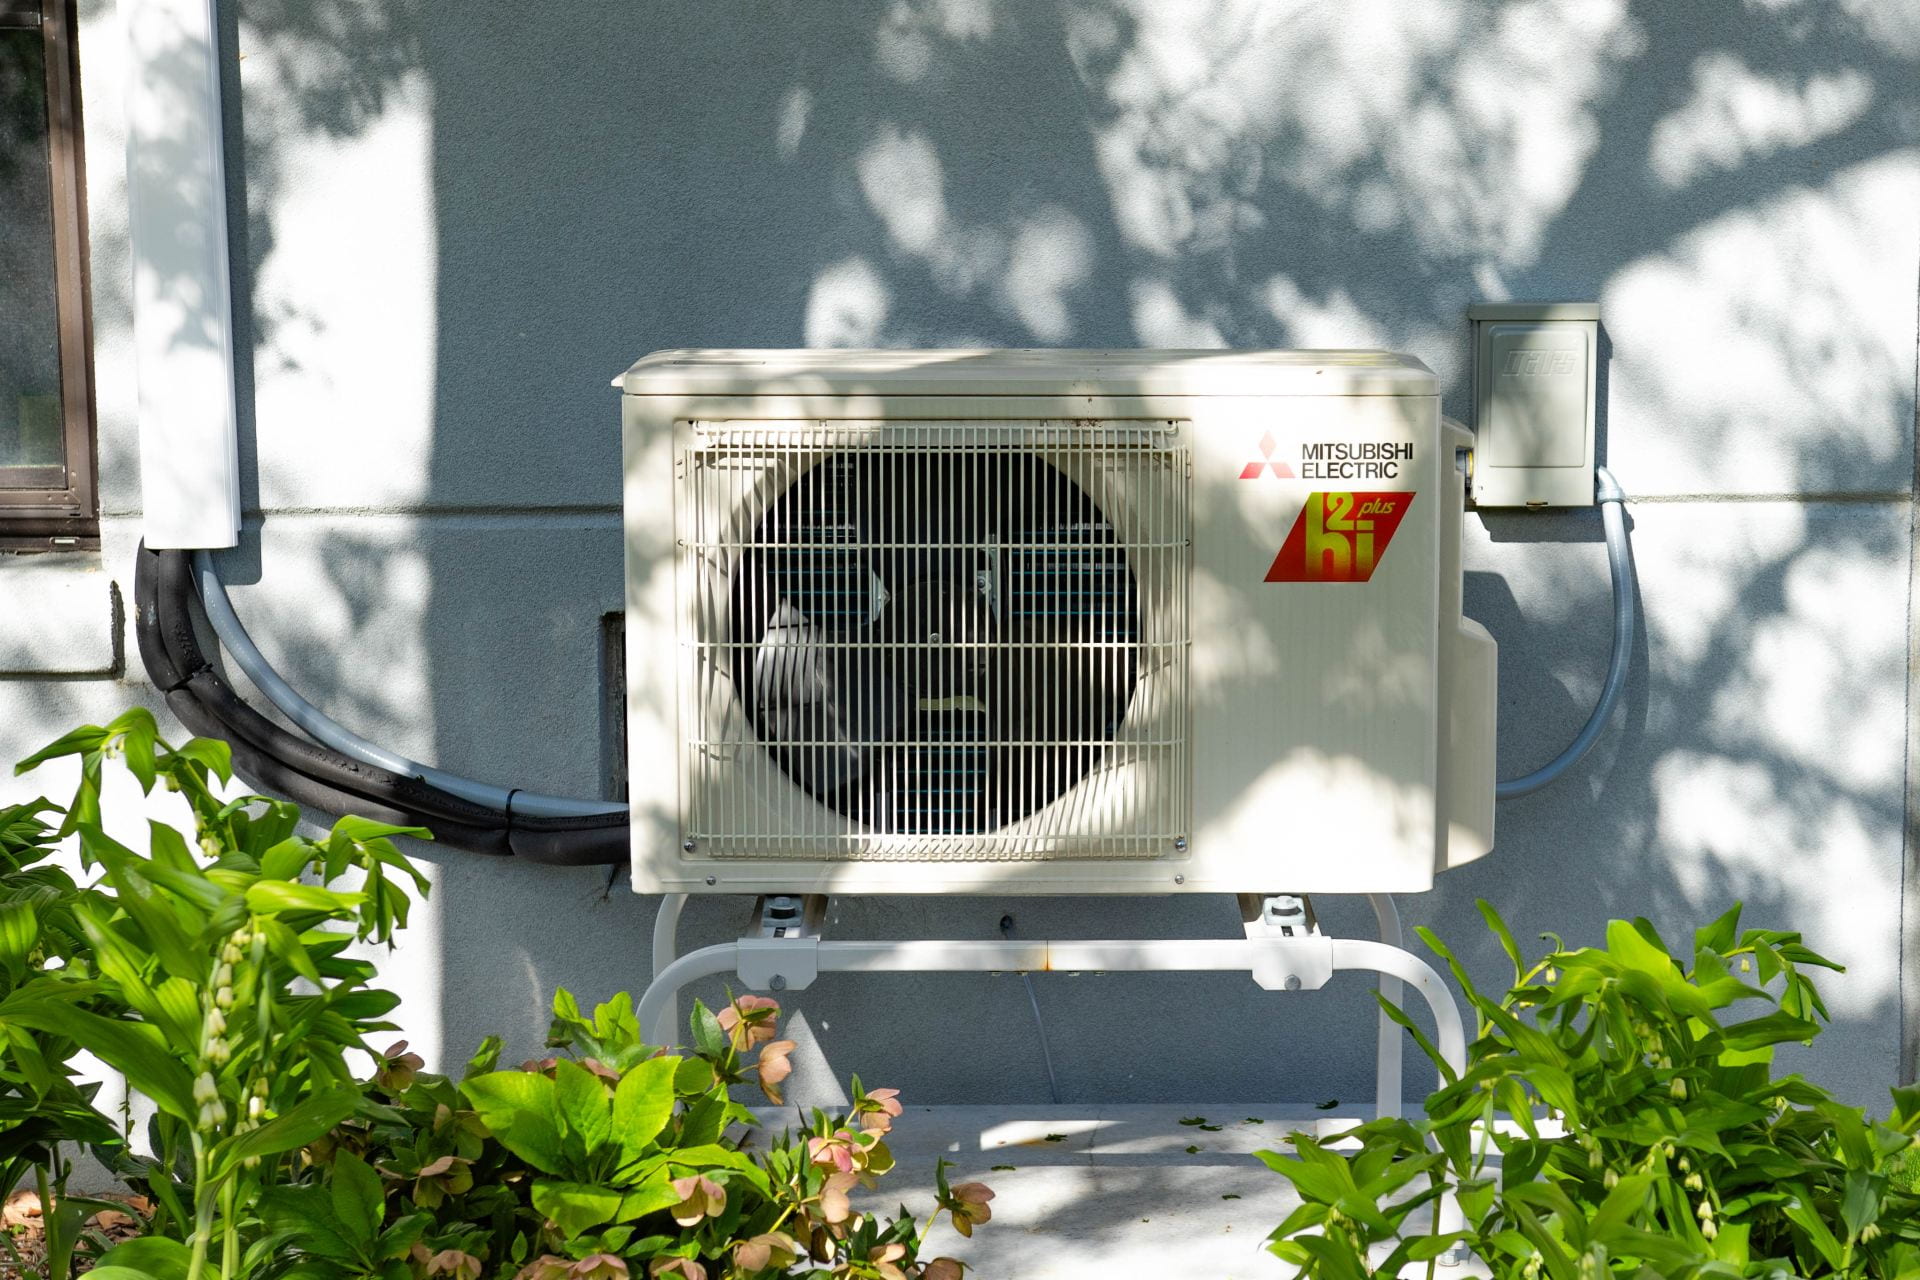 An image of a heat pump with foliage nearby